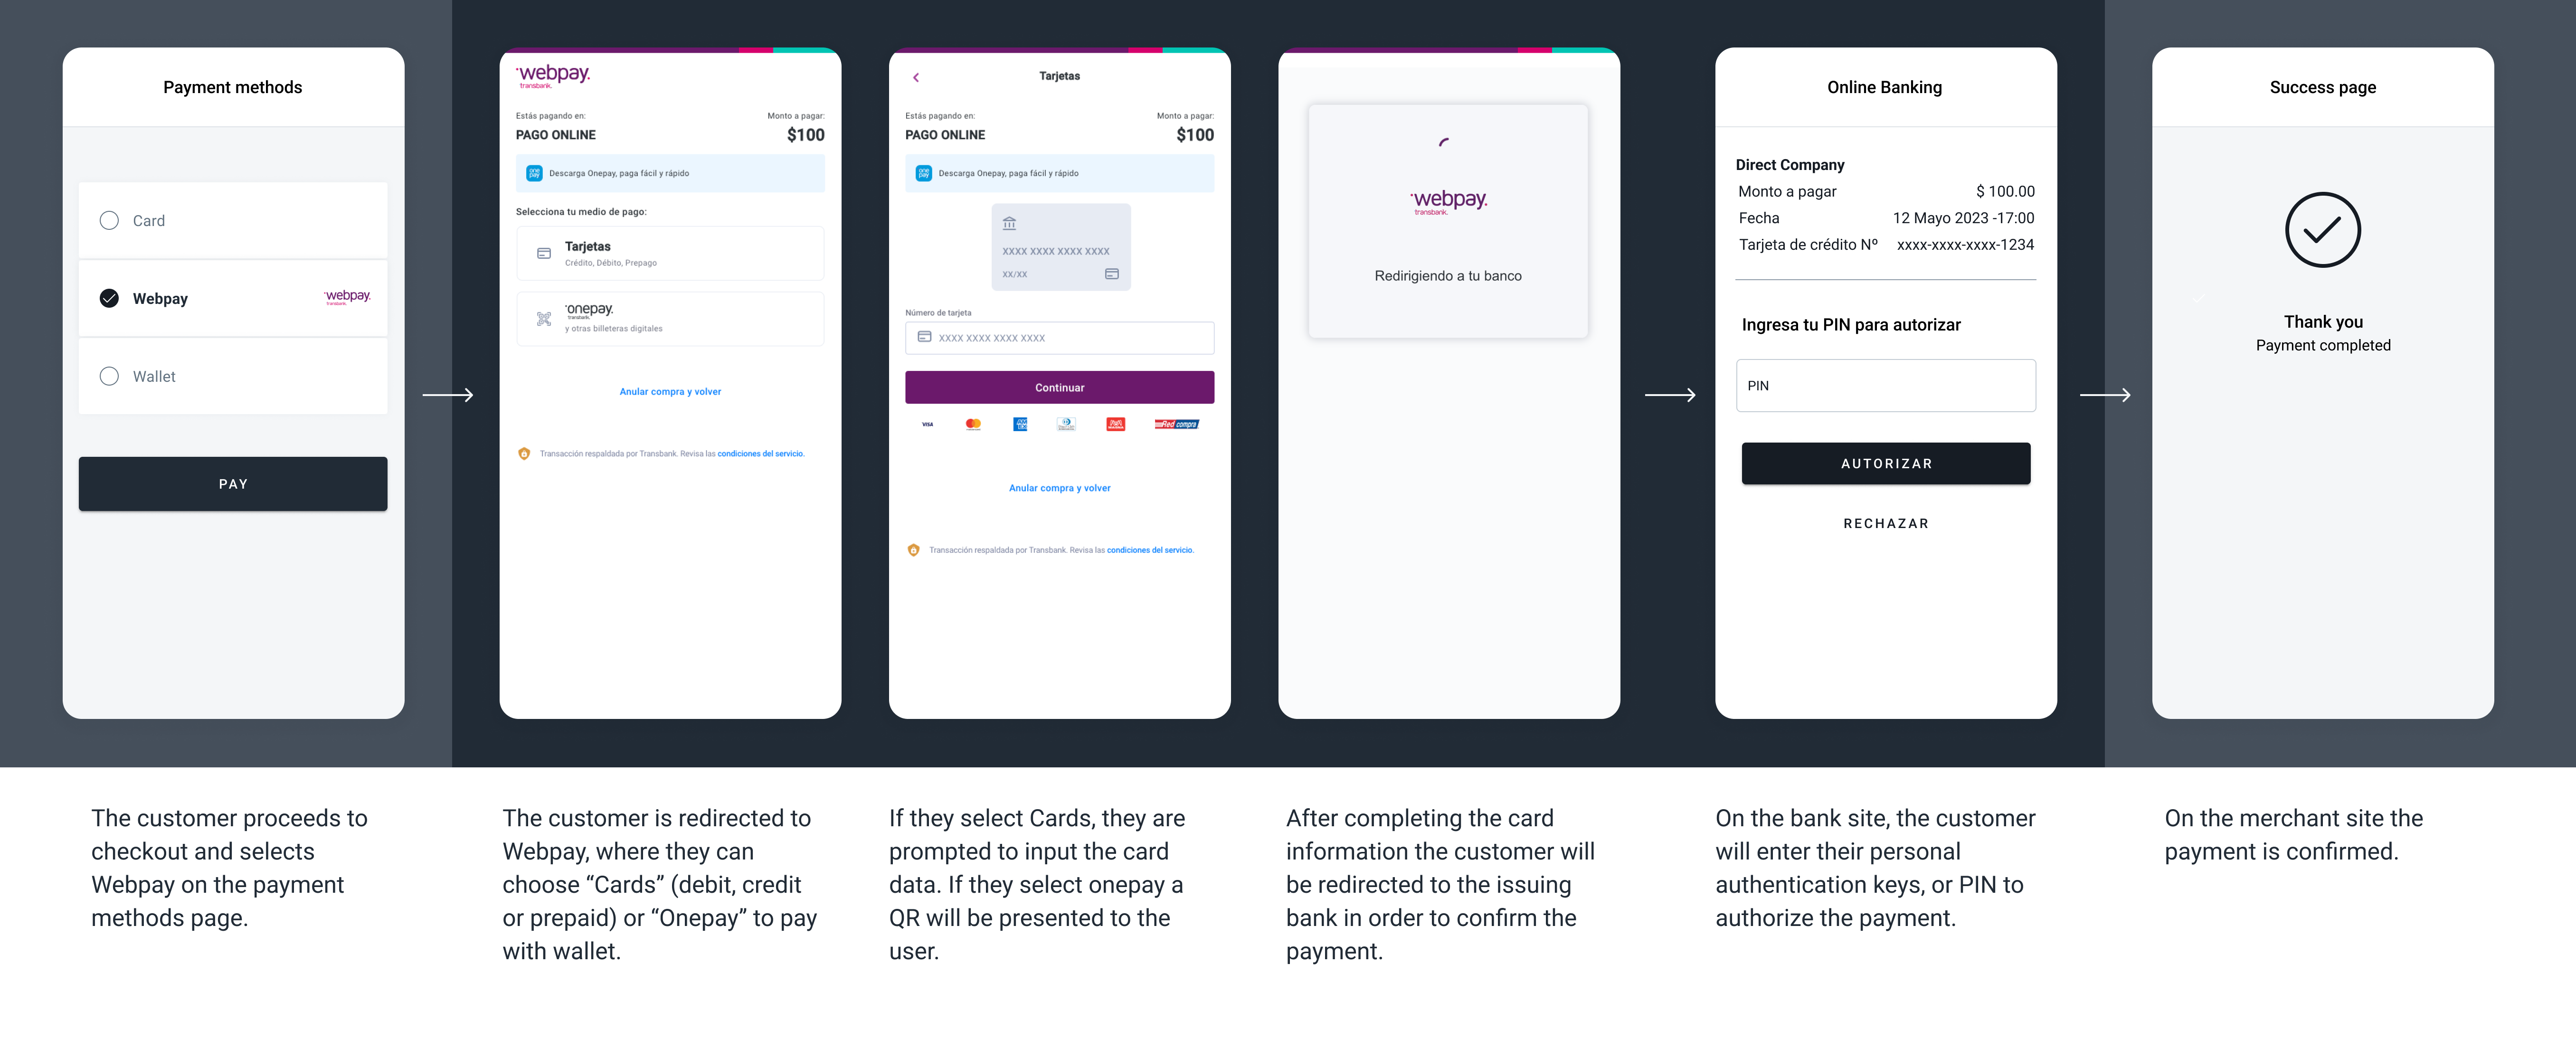 The screenshots illustrate a generic Webpay redirect flow, choosing cards as the payment method.